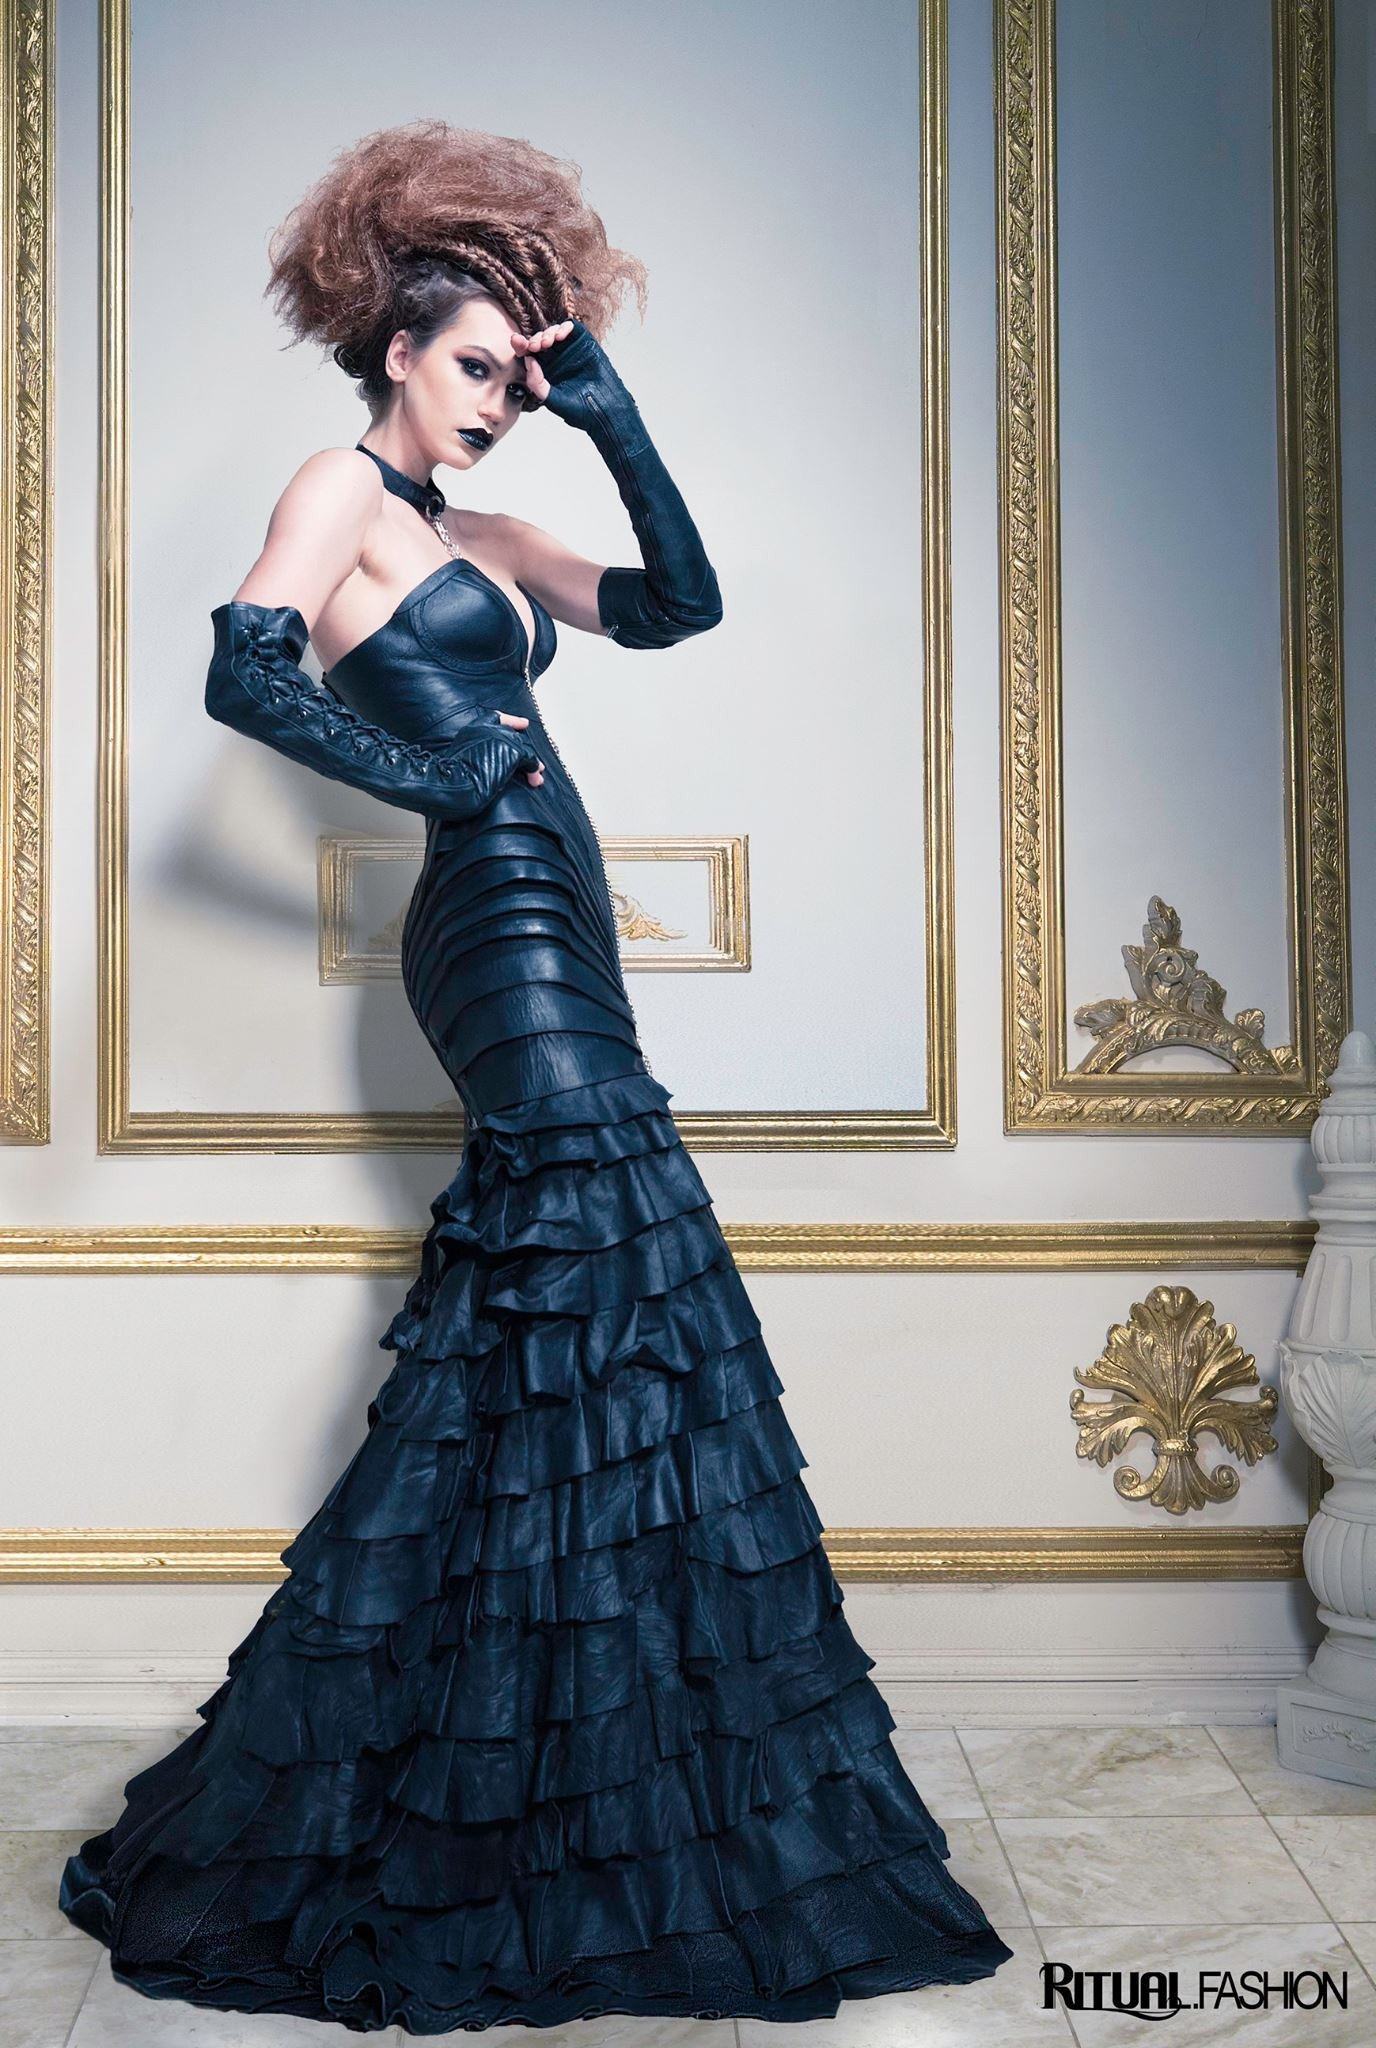 Couture Gowns and Dresses by RITUAL